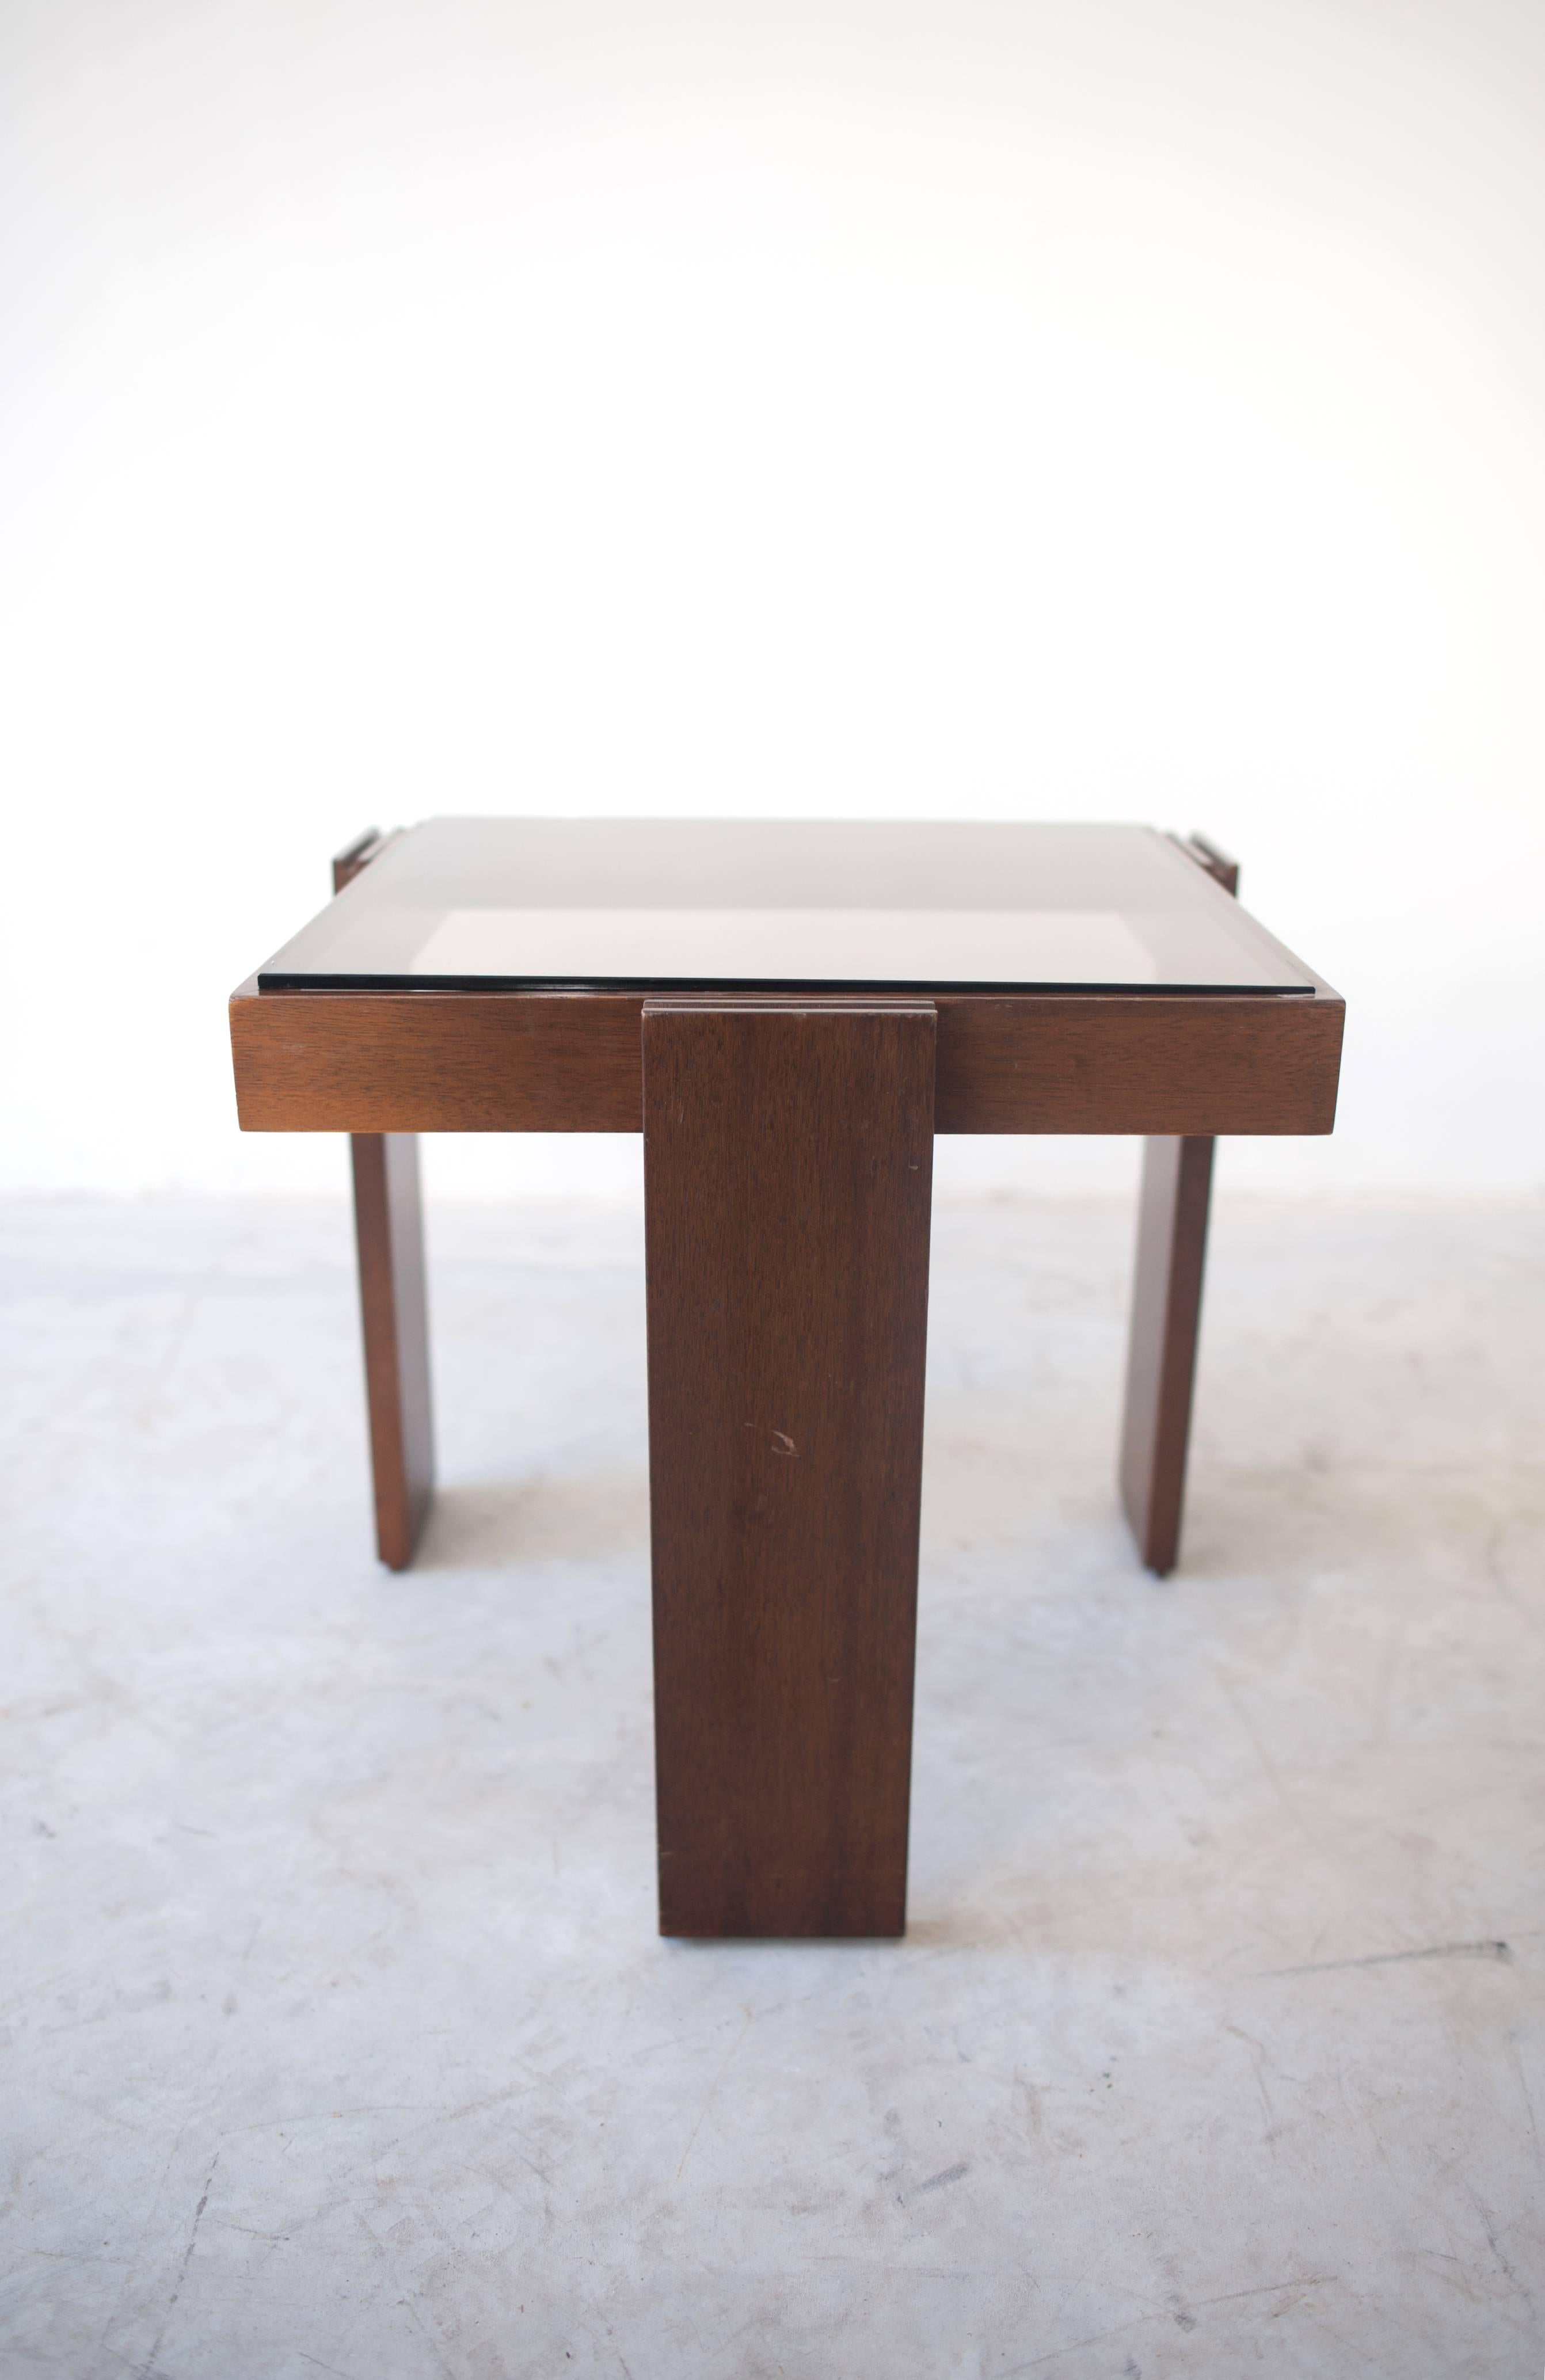 Hand-Crafted Modular Stackable Solid Wood Coffee, Side Tables by Frattini for Cassina For Sale